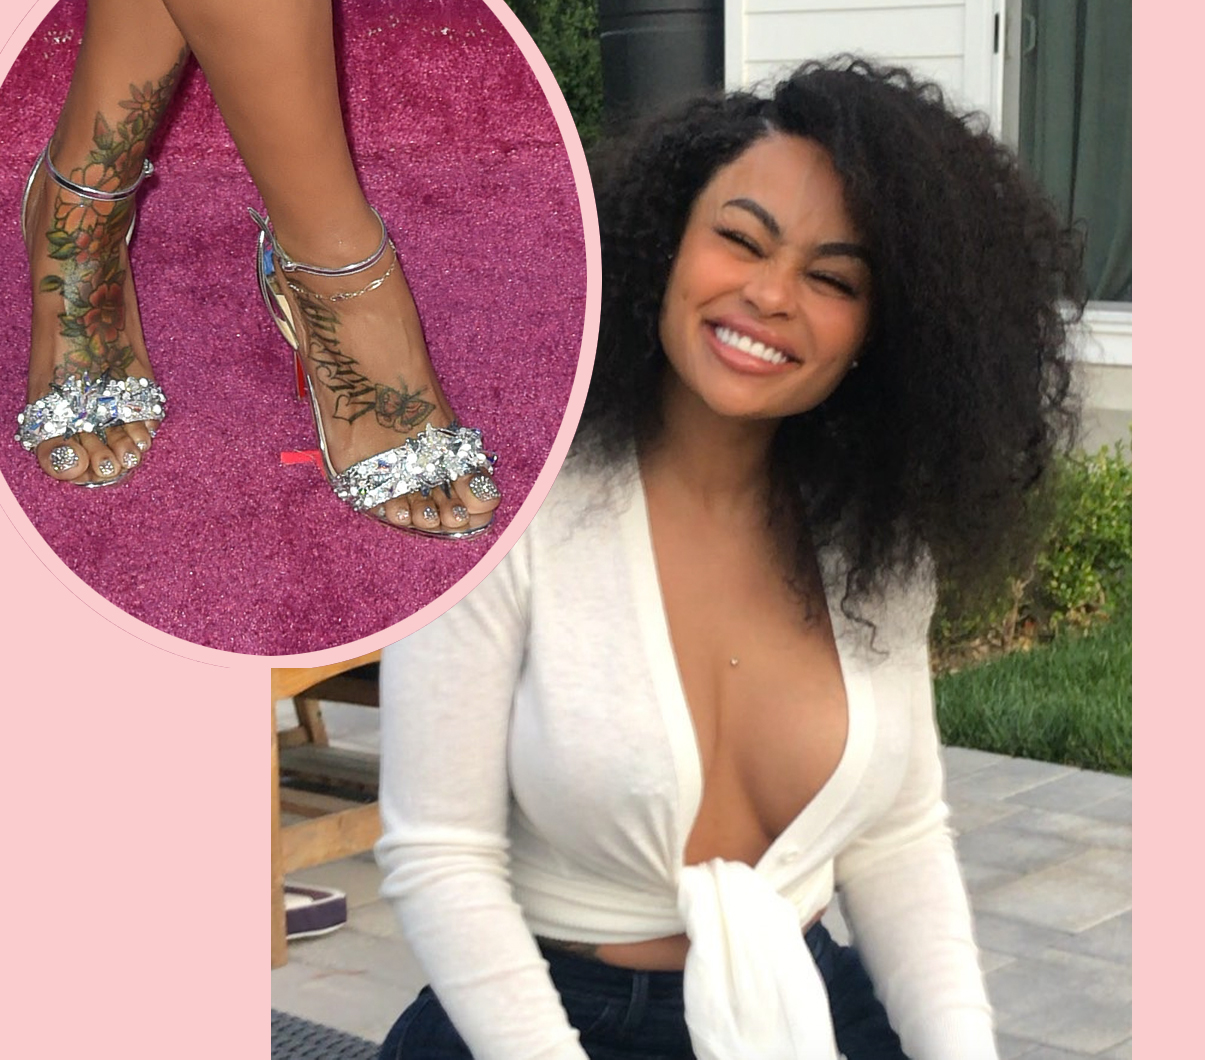 Blac Chyna Spotted Getting Her Toes Sucked In Public By New Man